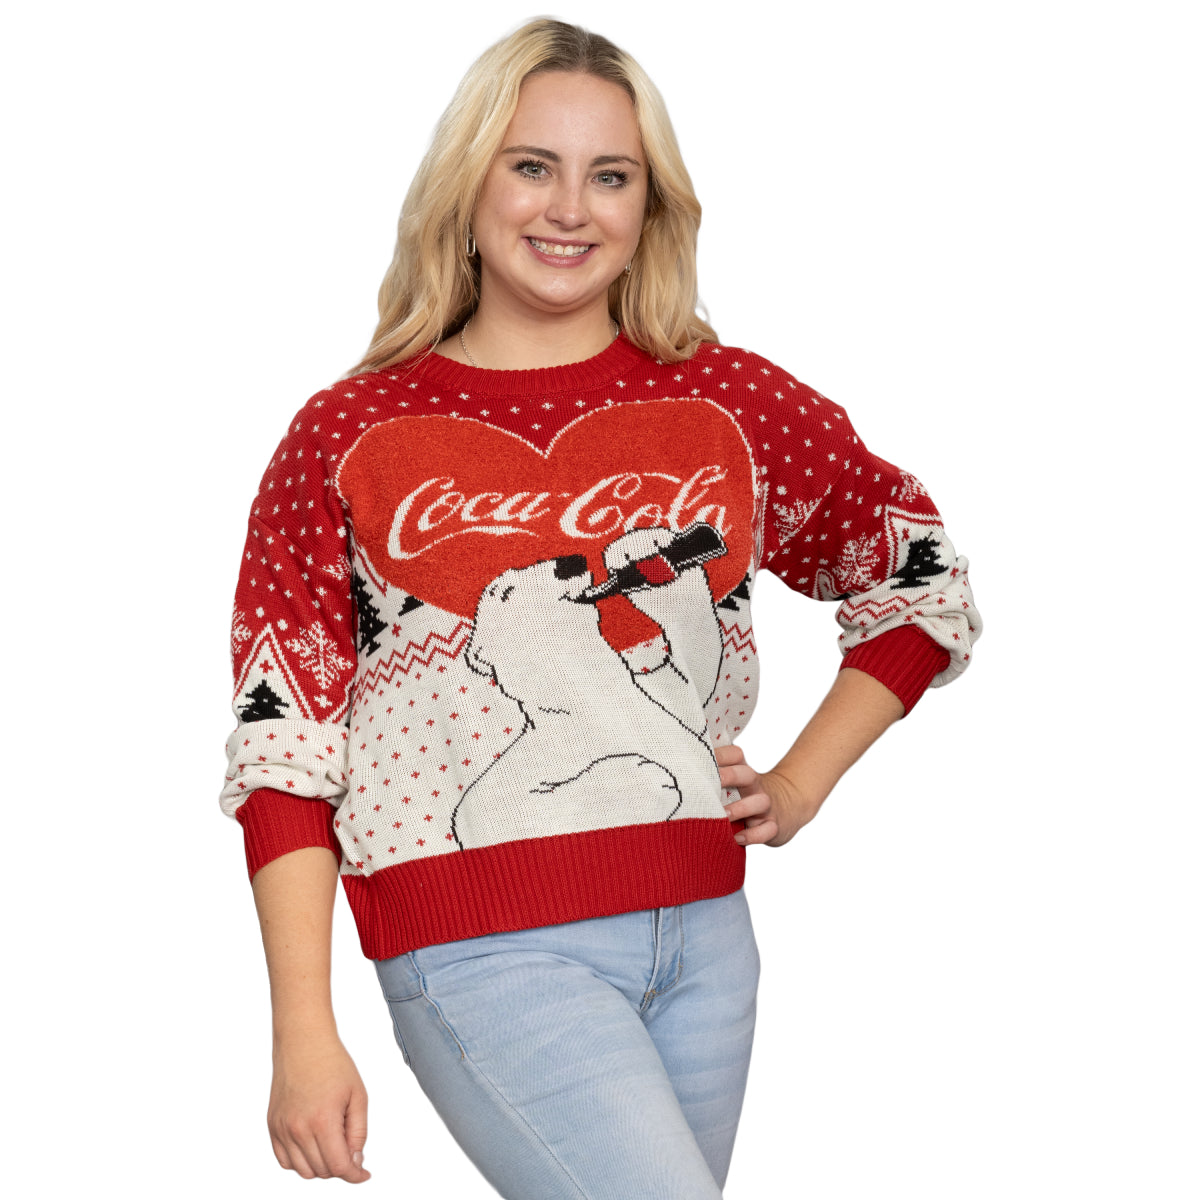 Coca-Cola Heart Bear Spread Joy with Festive Ugly Sweater Christmas Sweaters Style Pose